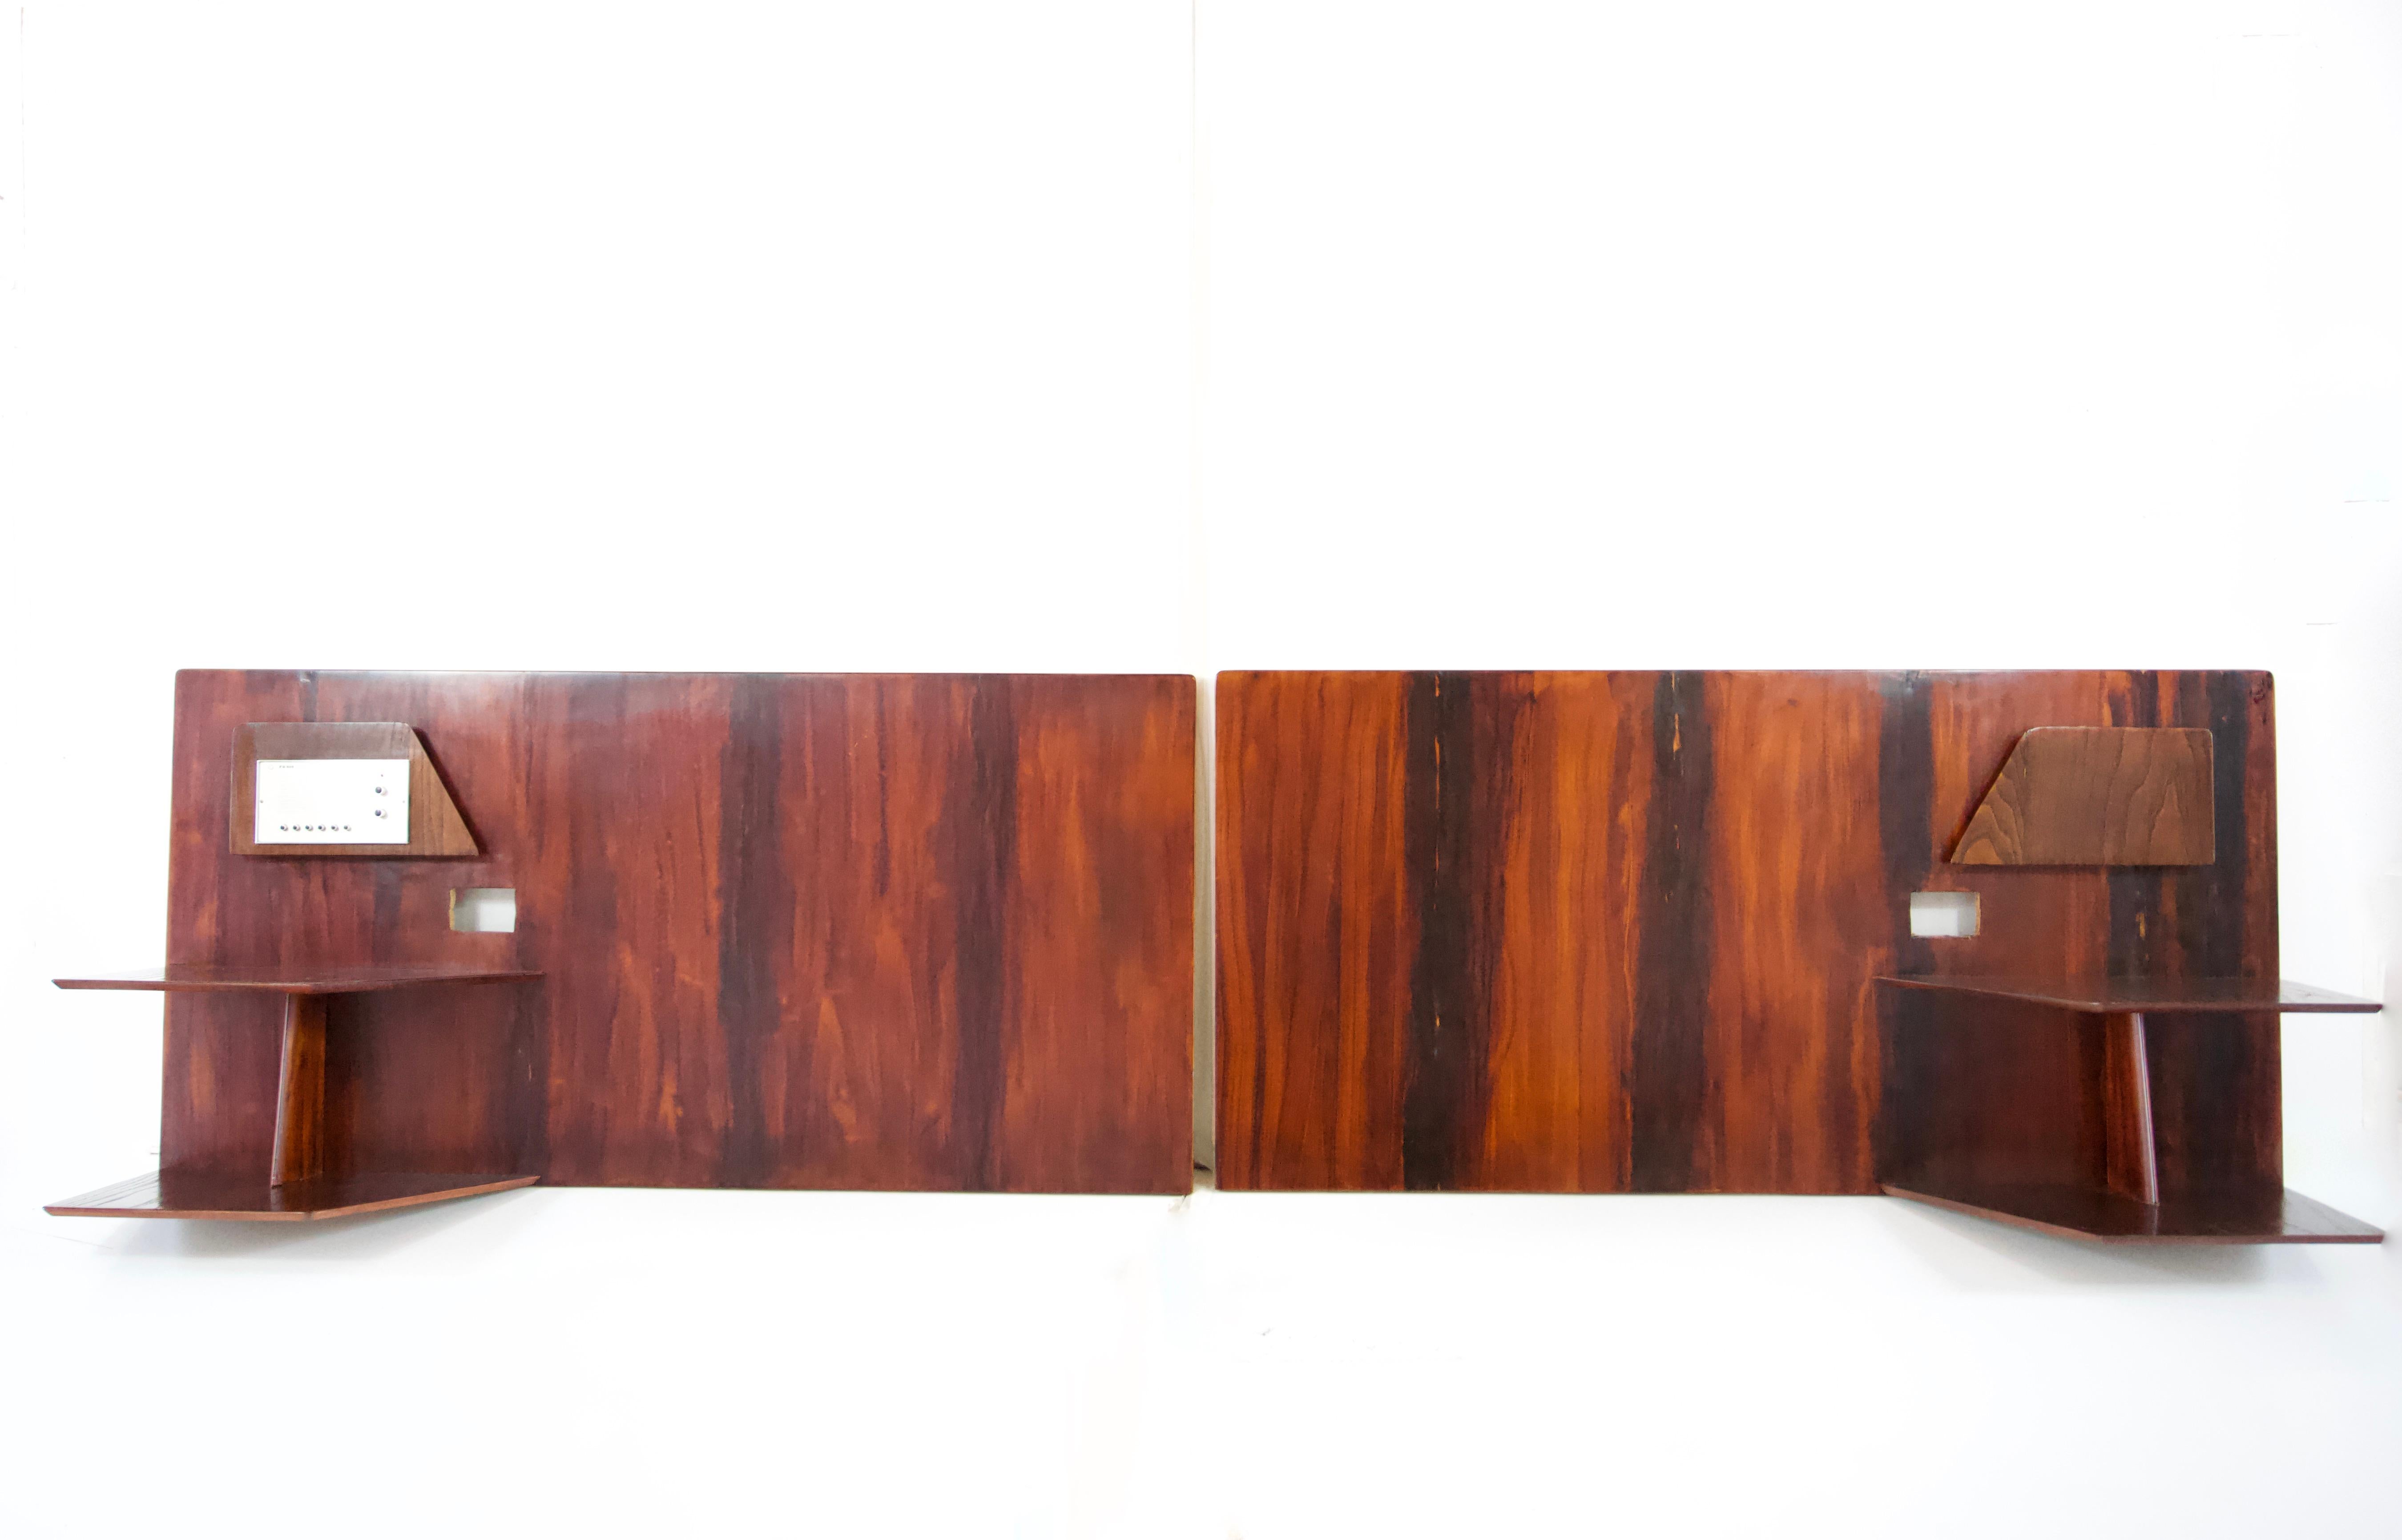 A pair of headboards by Gio Ponti from the furniture of the Hotel Royal in Naples, 1955.
Manufactured by Giordano Chiesa by Dassi.
flamed walnut, finish mahogany  and metal
two tiered shelving, magazine rack, space for lighting and two radio unit (